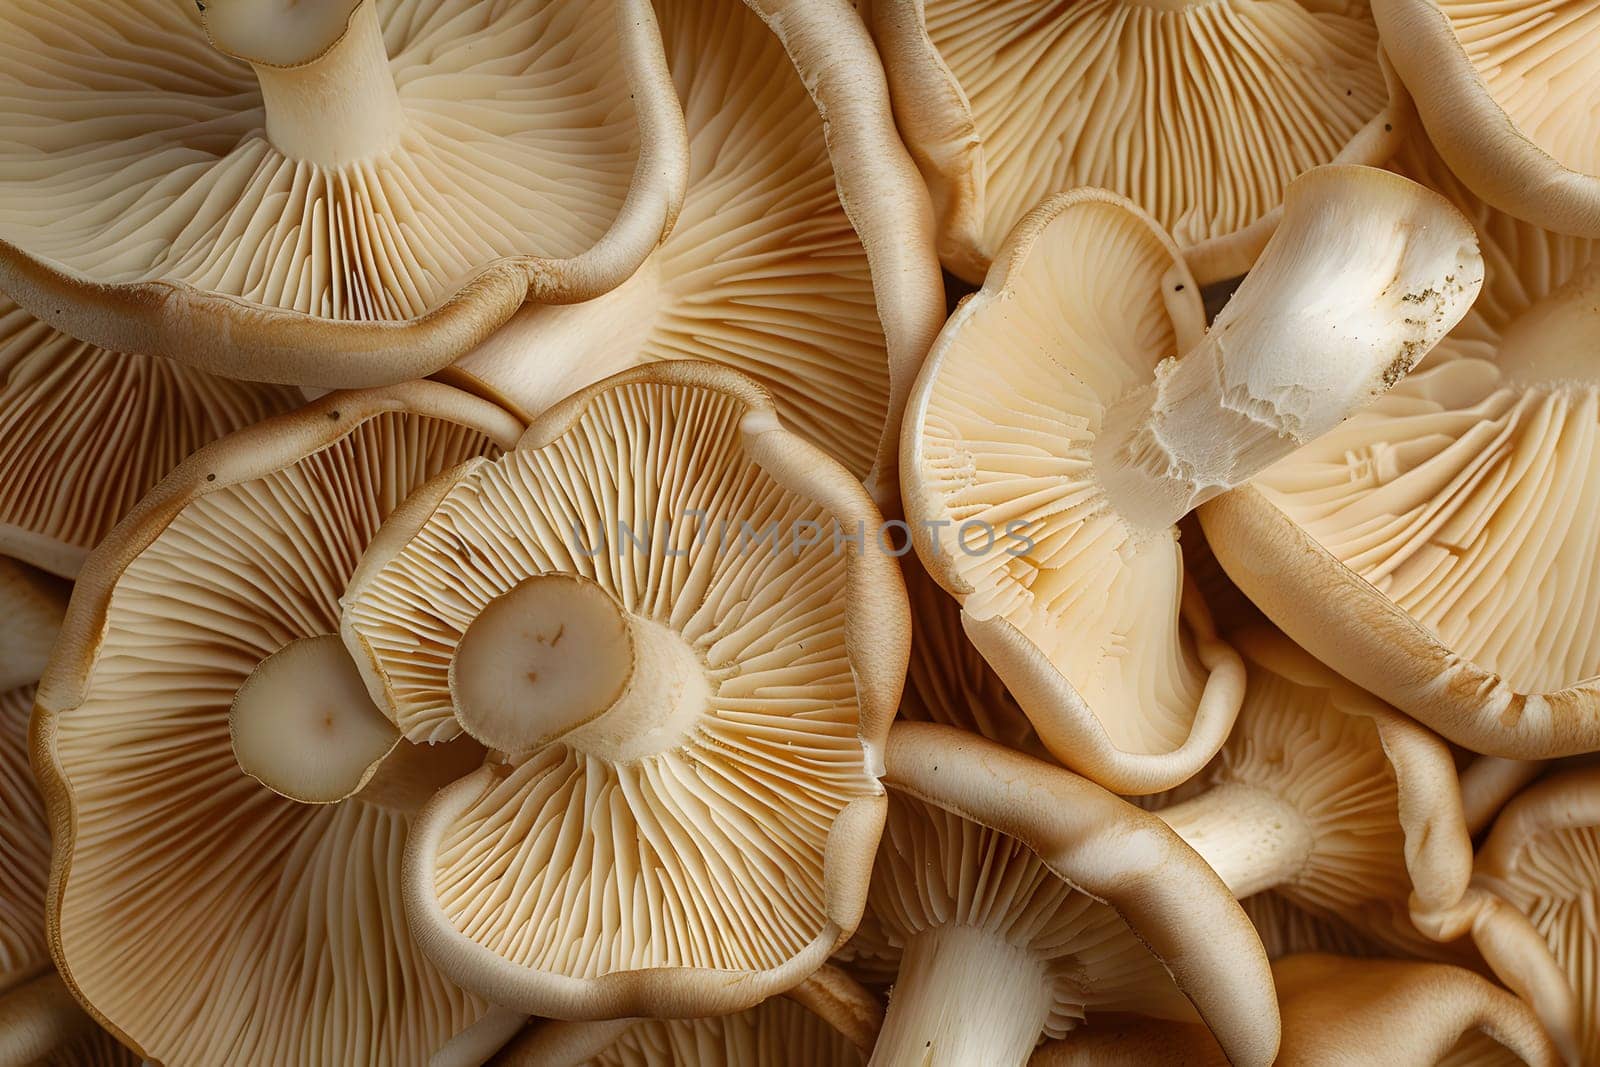 Close-up image of raw oyster mushrooms with detailed gills texture for culinary use in vegetarian and vegan dishes.